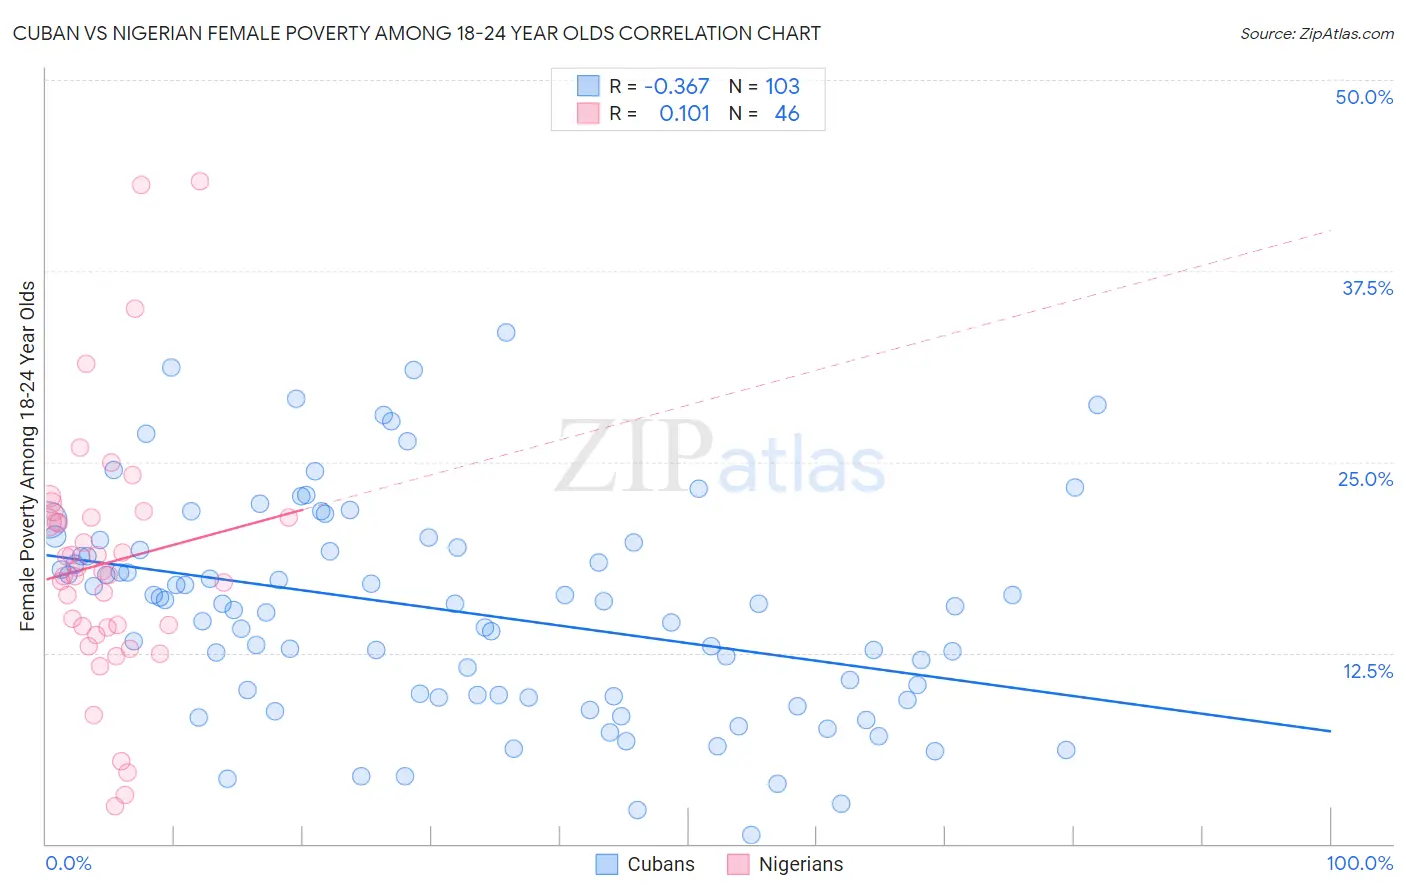 Cuban vs Nigerian Female Poverty Among 18-24 Year Olds